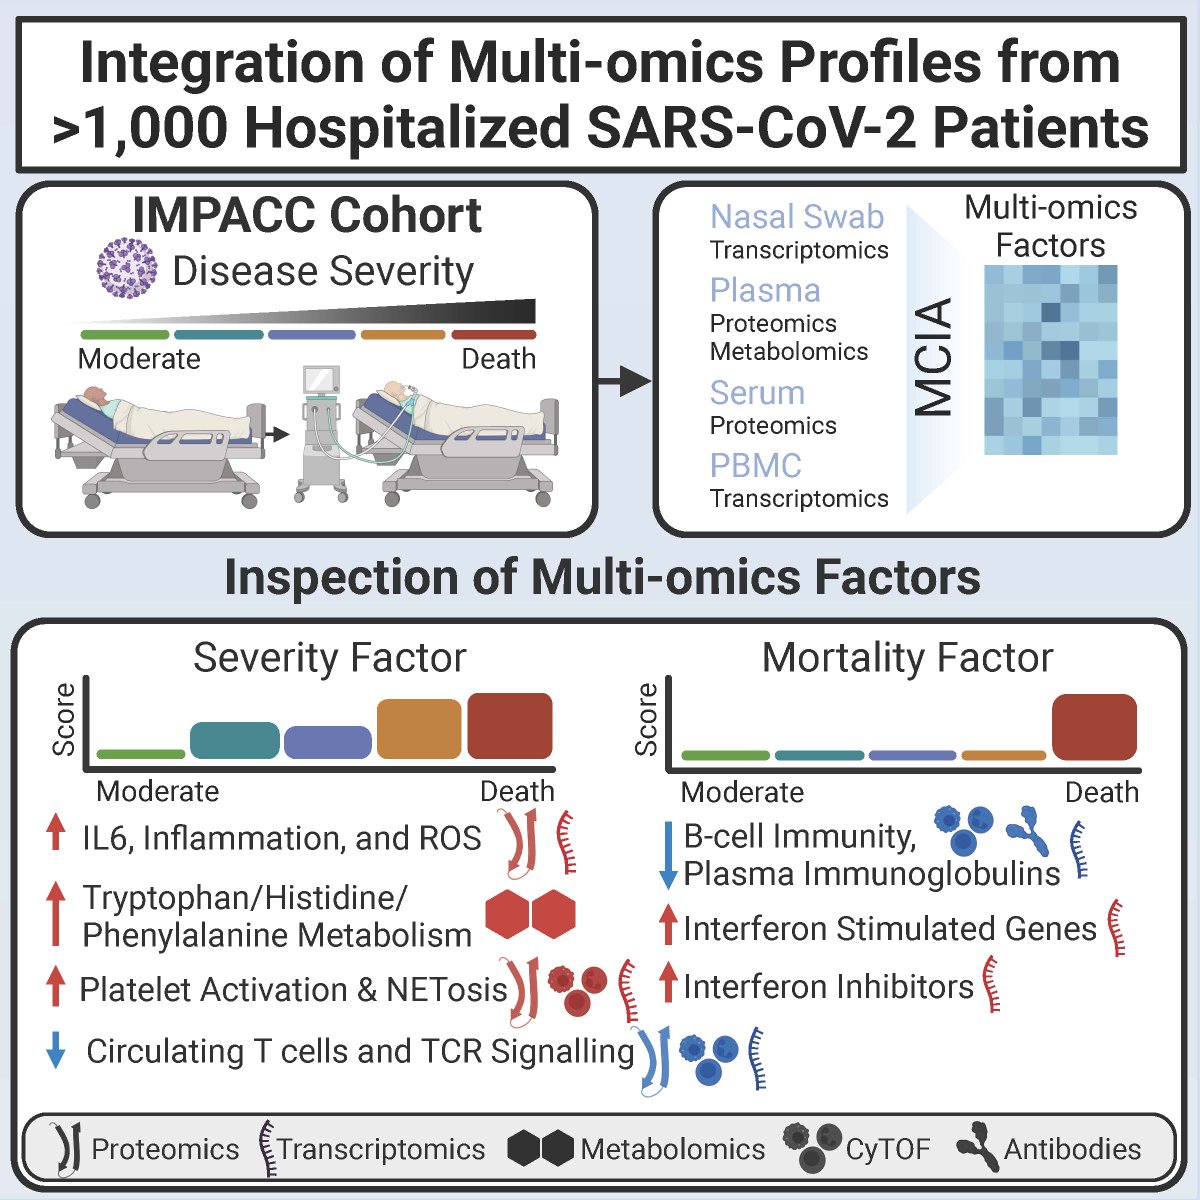 I am excited to share that our #IMPACC paper - Integrated longitudinal multi-omics study identifies immune programs associated with acute COVID-19 severity and mortality - was recently published in @jclinicalinvest. jci.org/articles/view/… #SystemsBiology #Bioinformatics   [1/5]